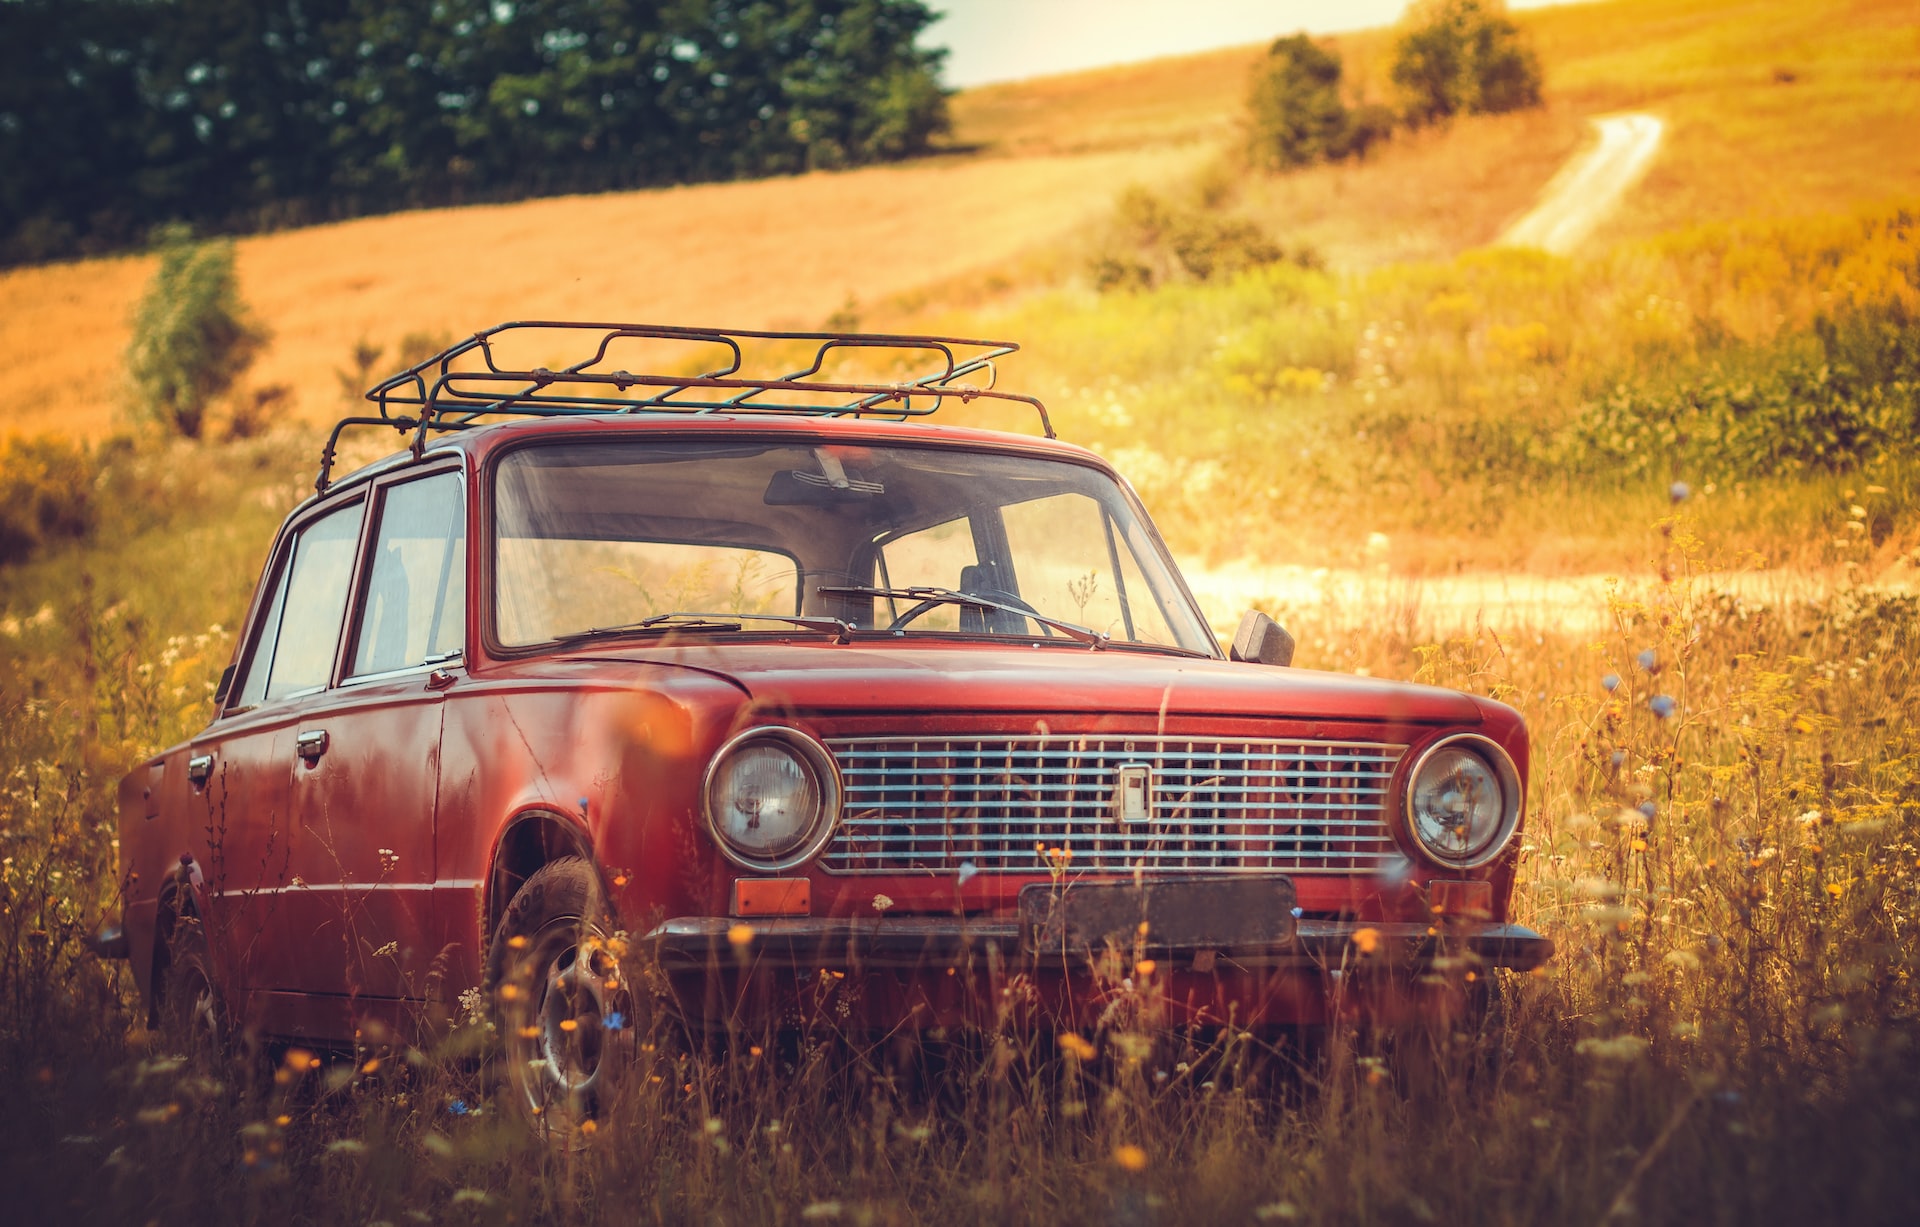 Valuable Items That You Should Remove Before Selling Your Old Car